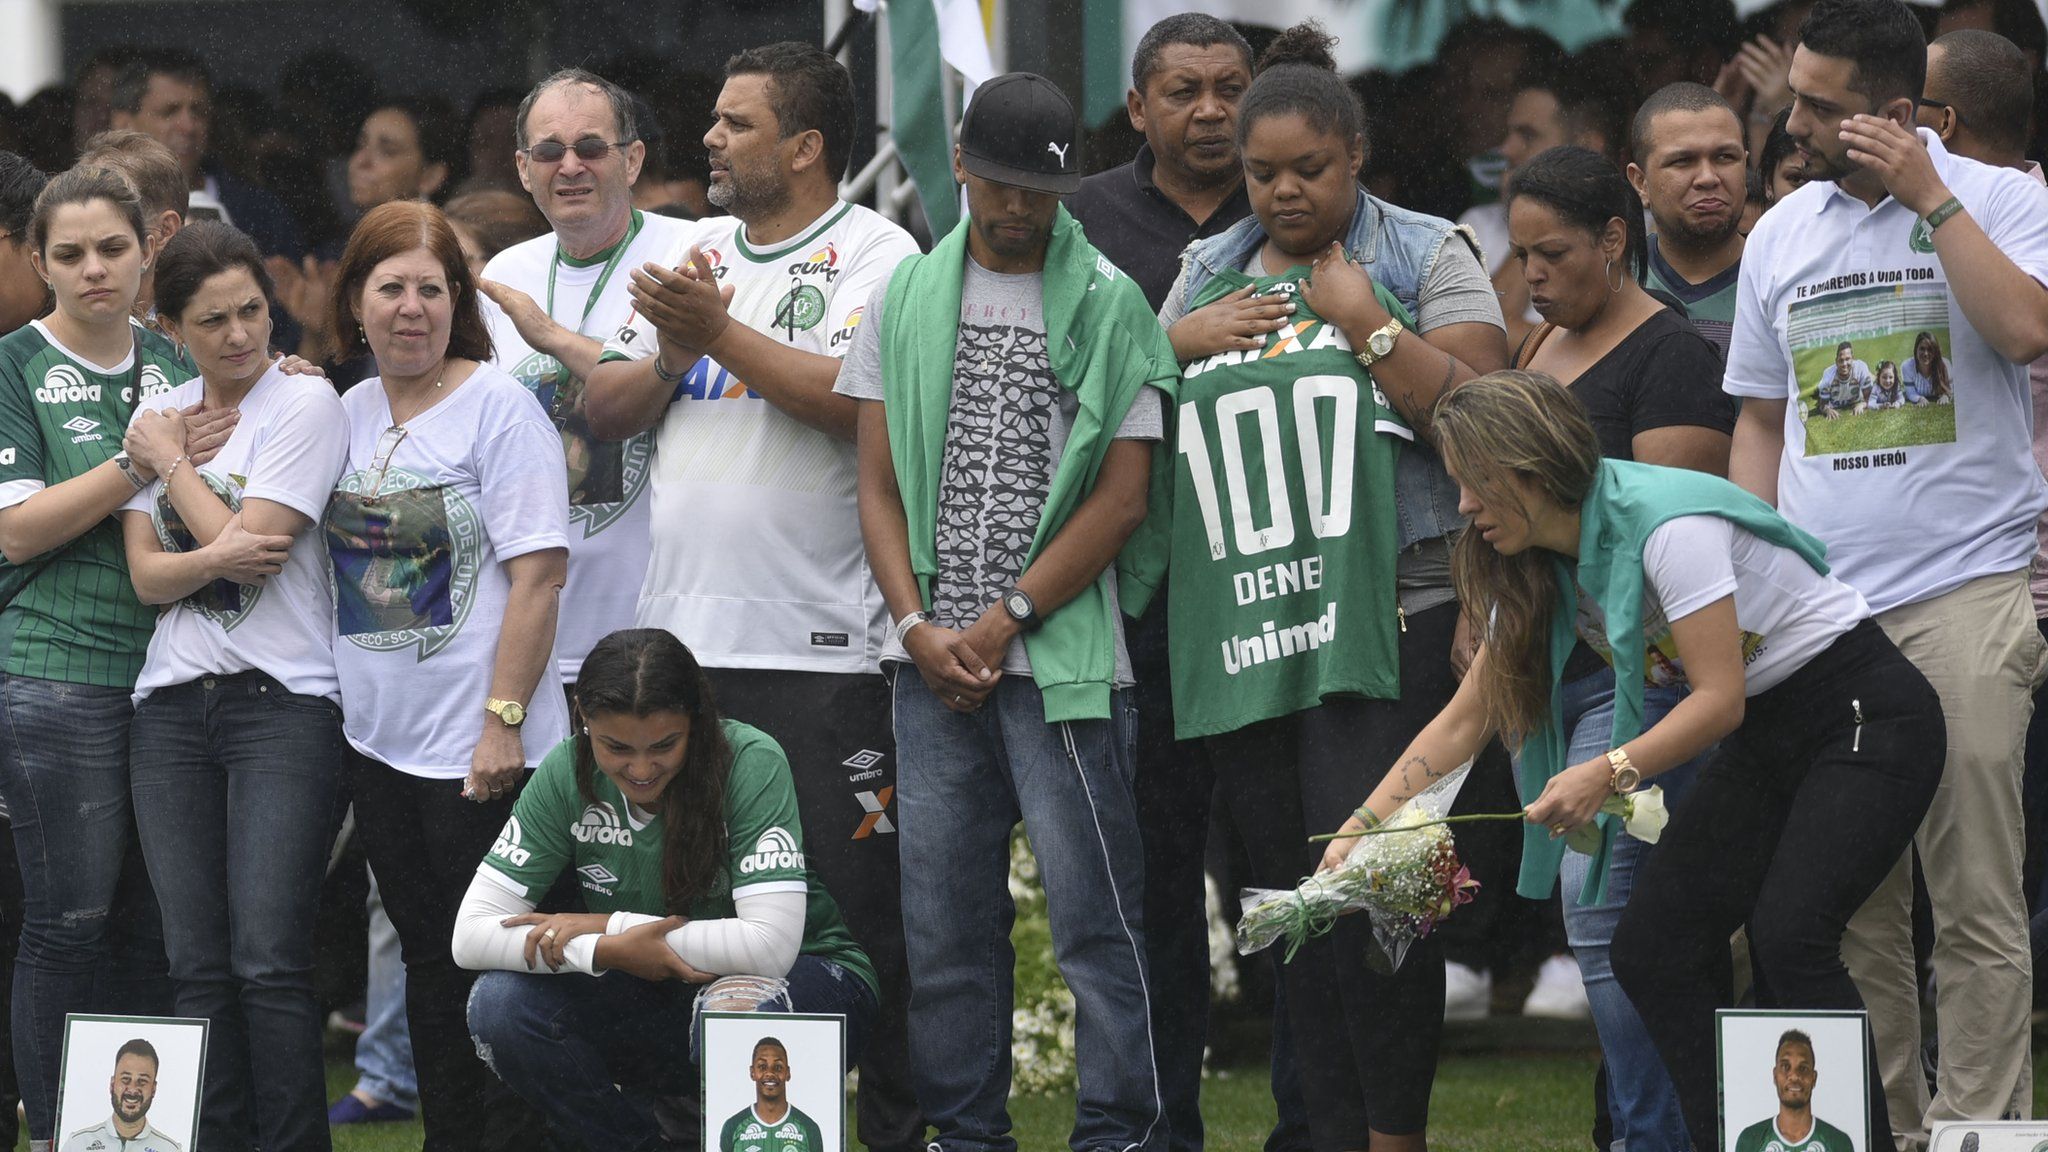 Supporters and families pay tribute to the deceased